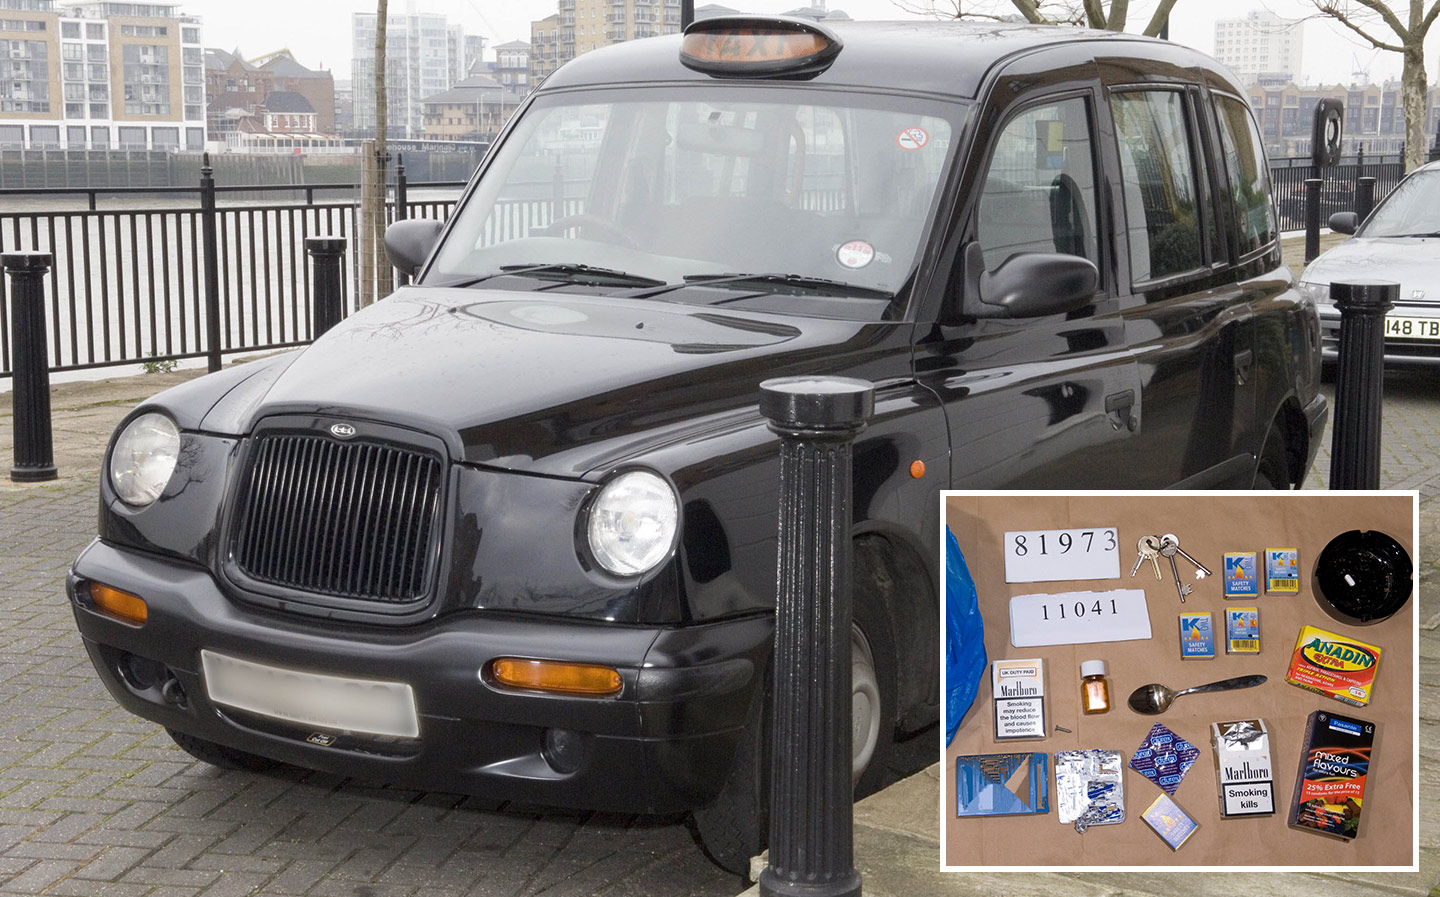 John Worboys' black cab and "rape kit", which included condoms, a sex toy and drugs